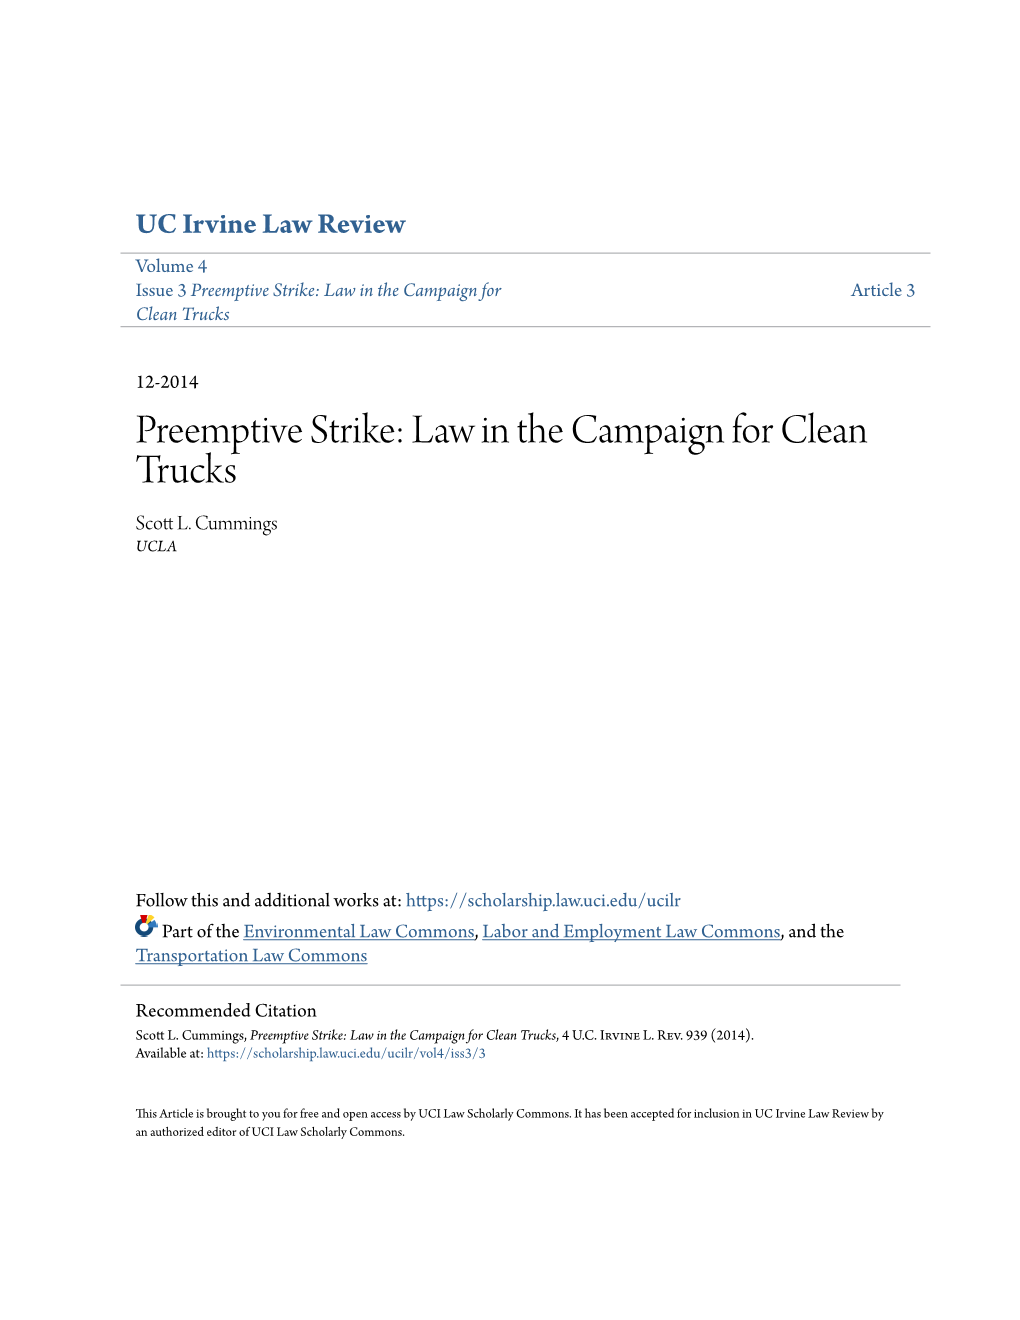 Preemptive Strike: Law in the Campaign for Article 3 Clean Trucks